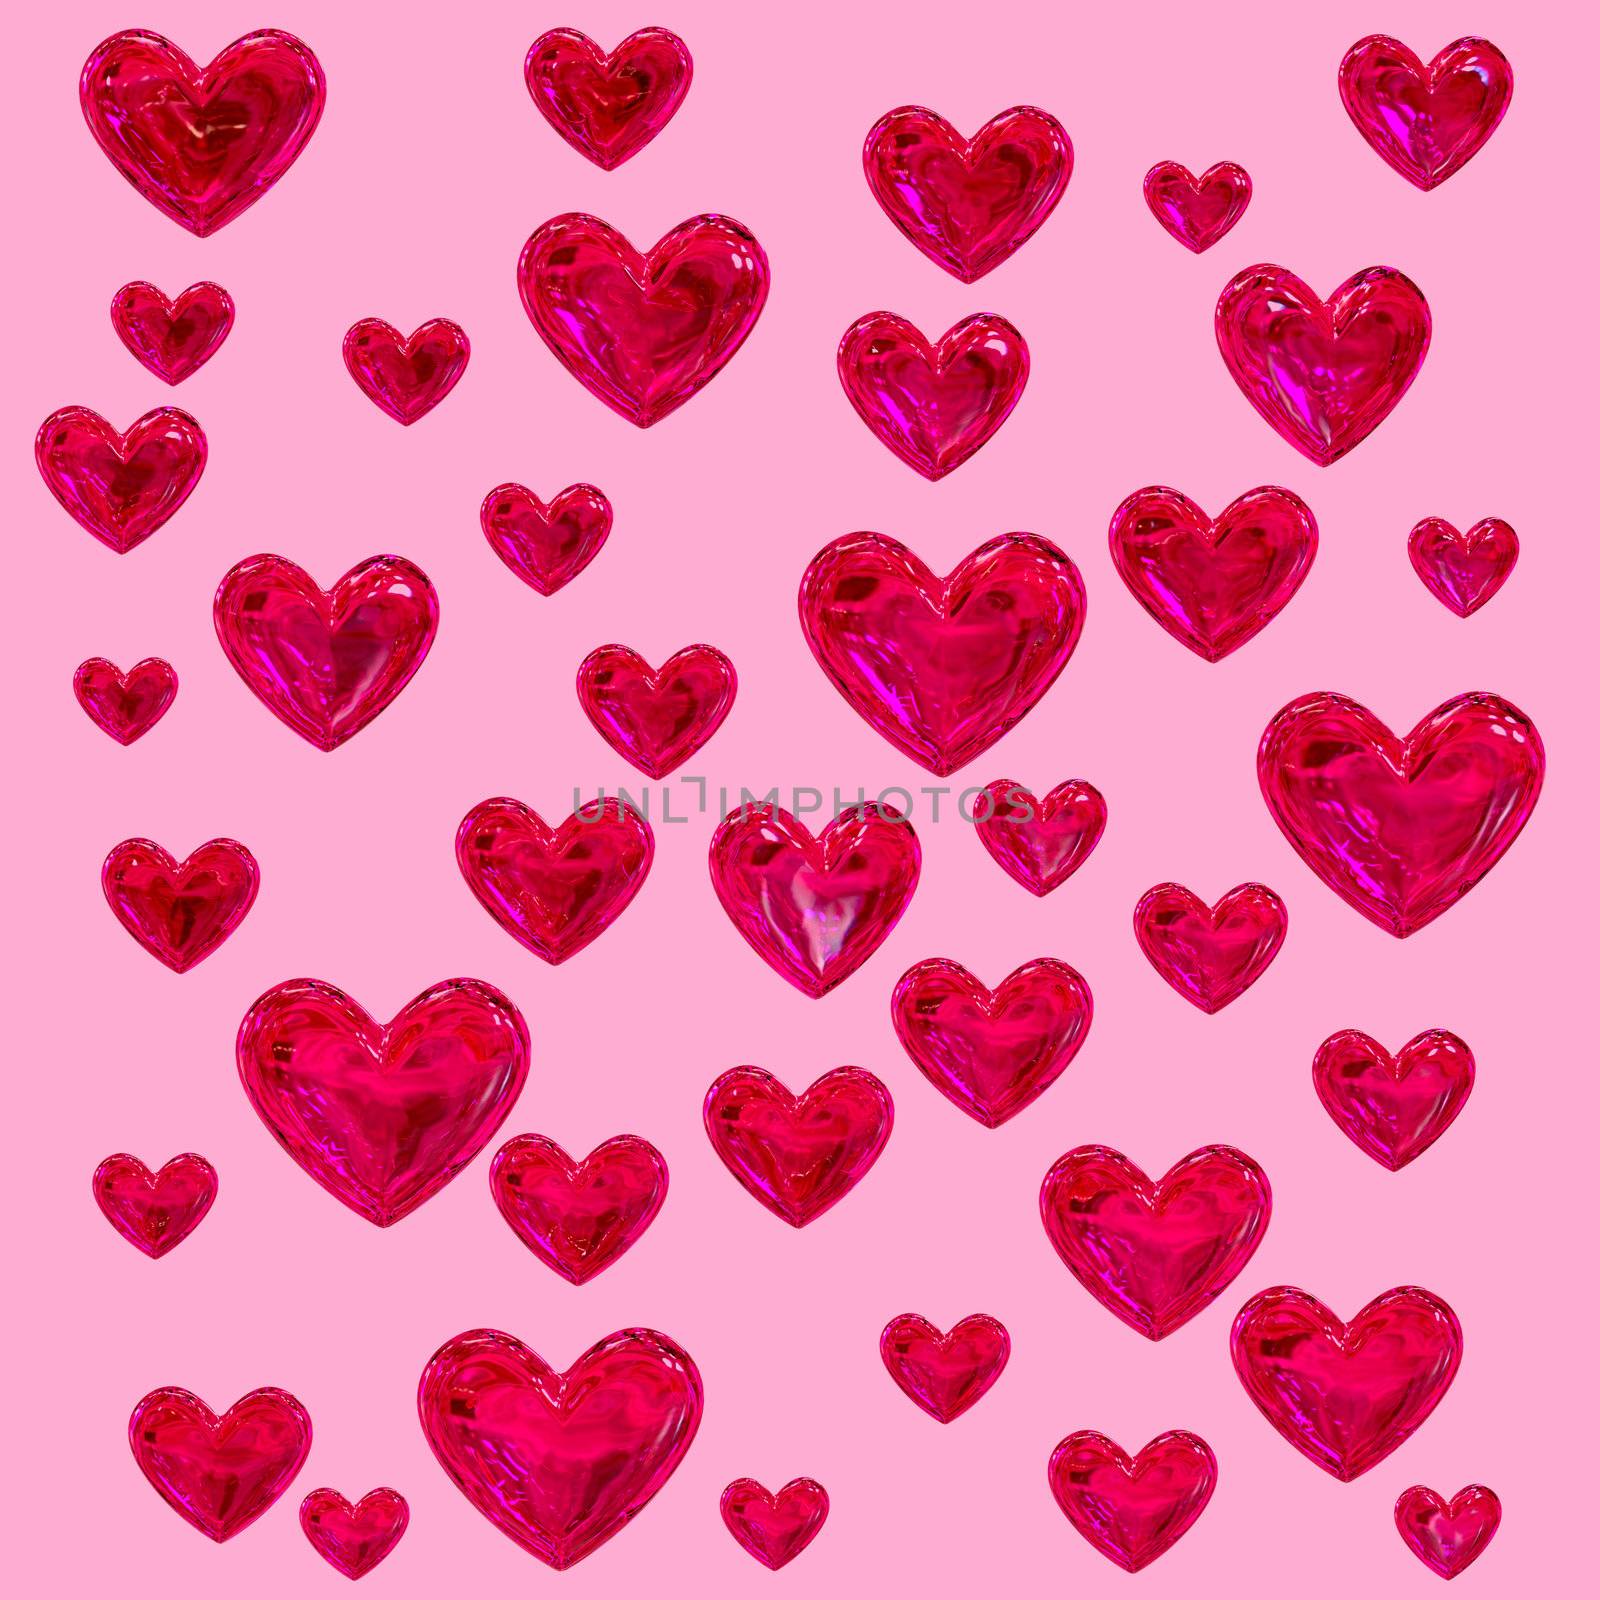 set of red hearts on a pink background as a texture